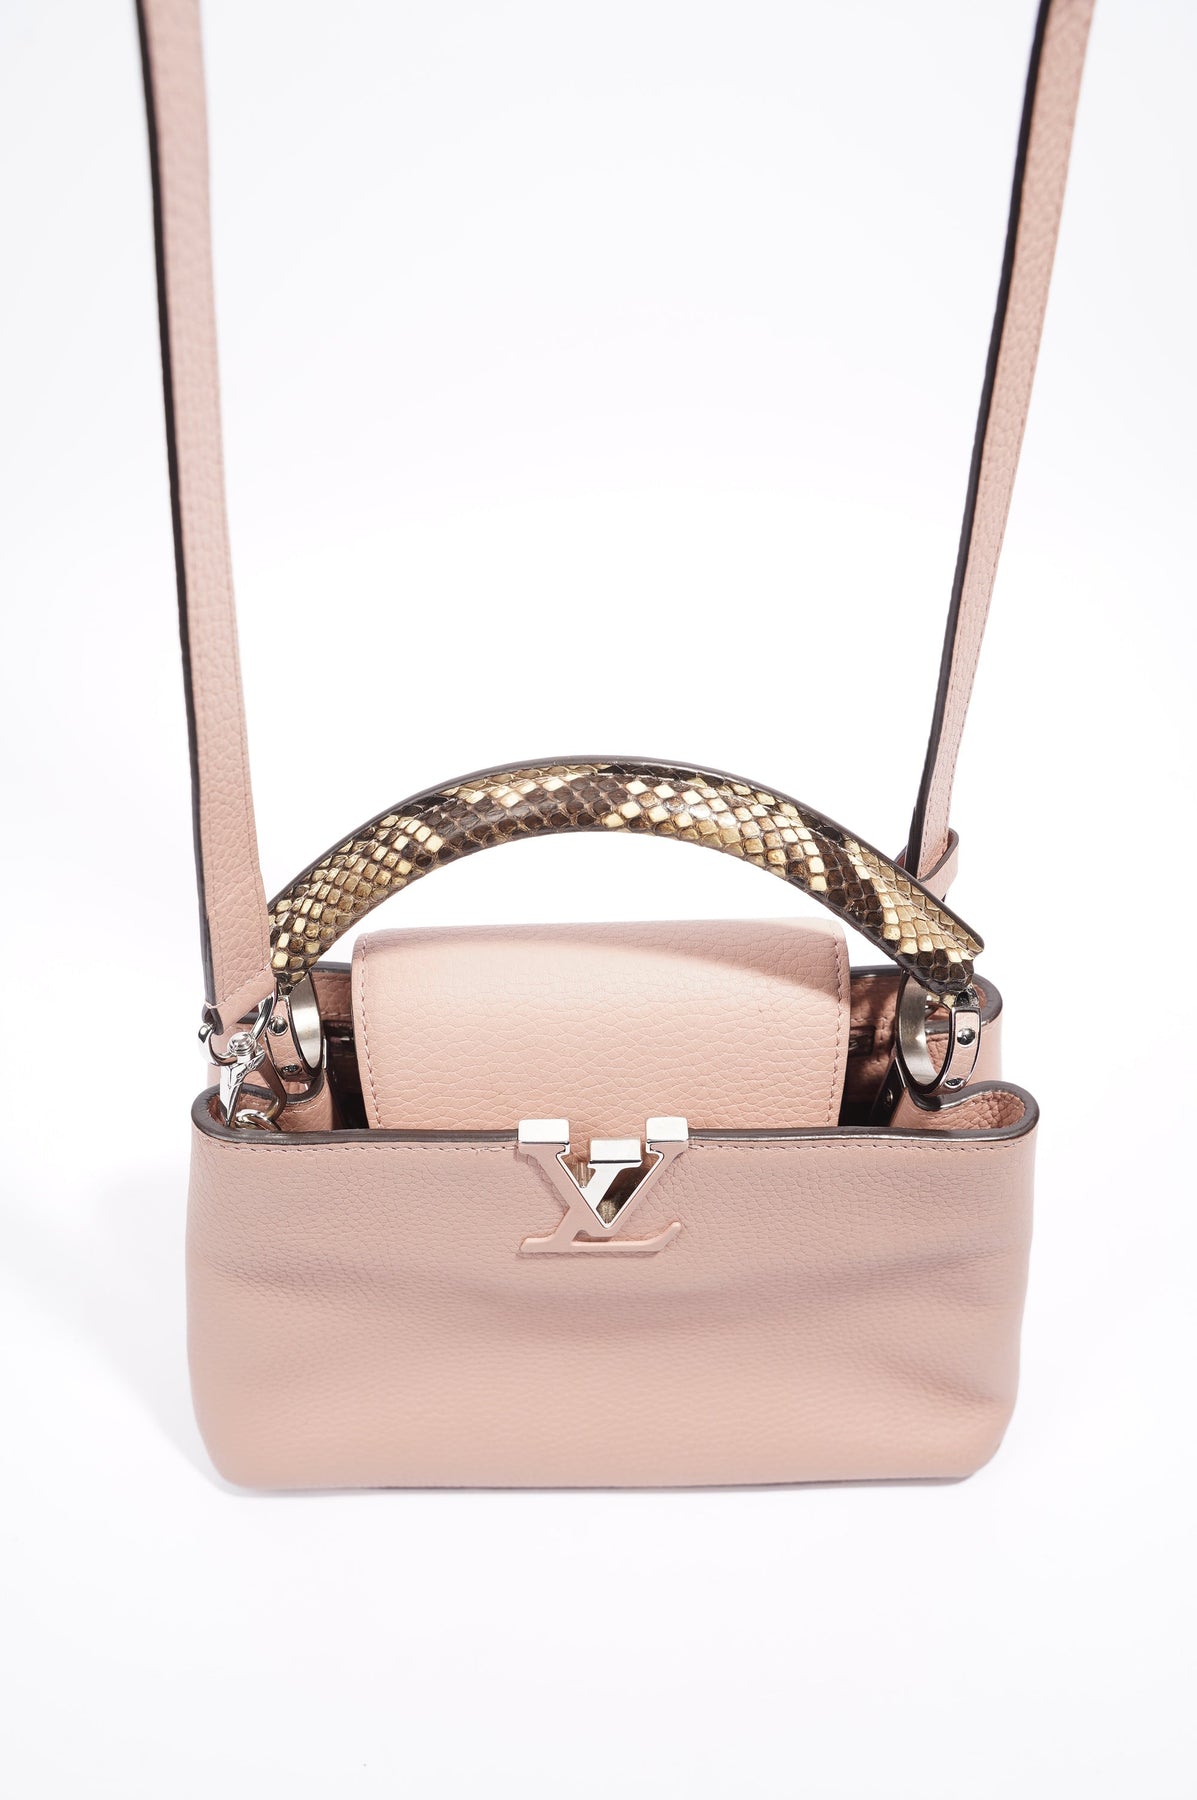 Capucines leather handbag Louis Vuitton Pink in Leather - 32868300